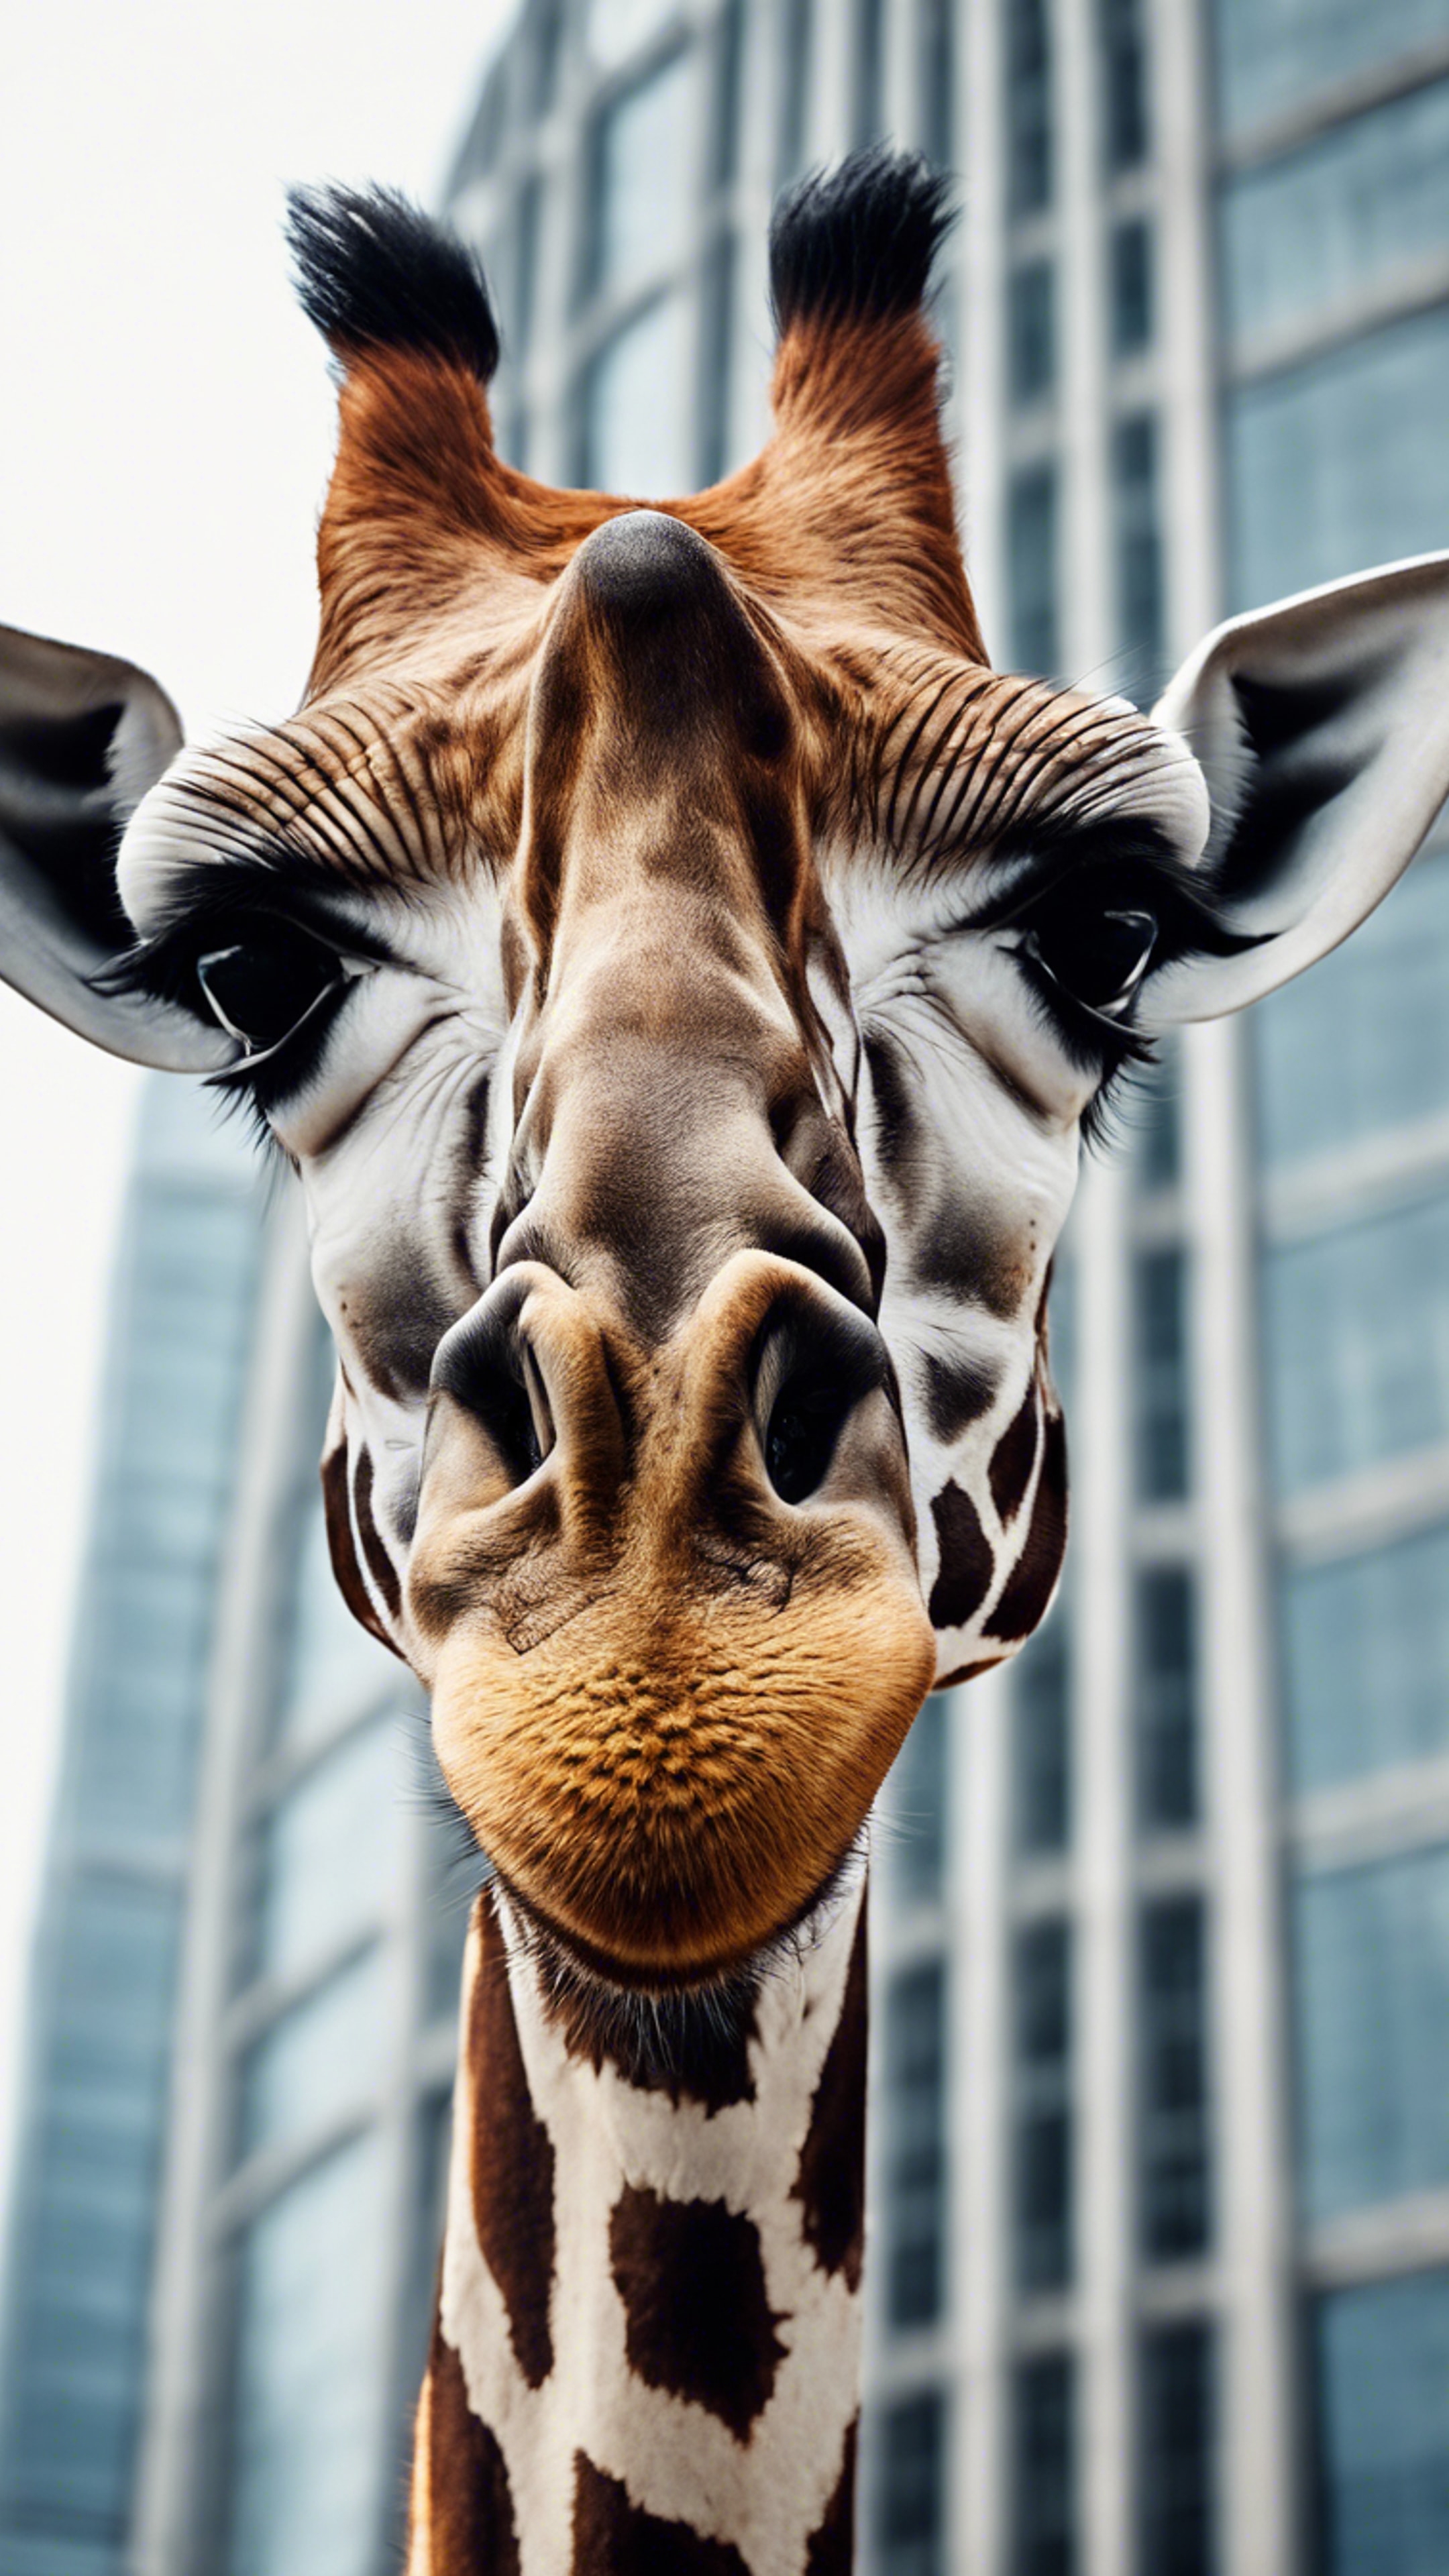 A giraffe in an urban setting, poking its head out from behind a skyscraper, symbolising wild nature confronting urbanisation. Fond d'écran[4646bbcdc786429d9f19]